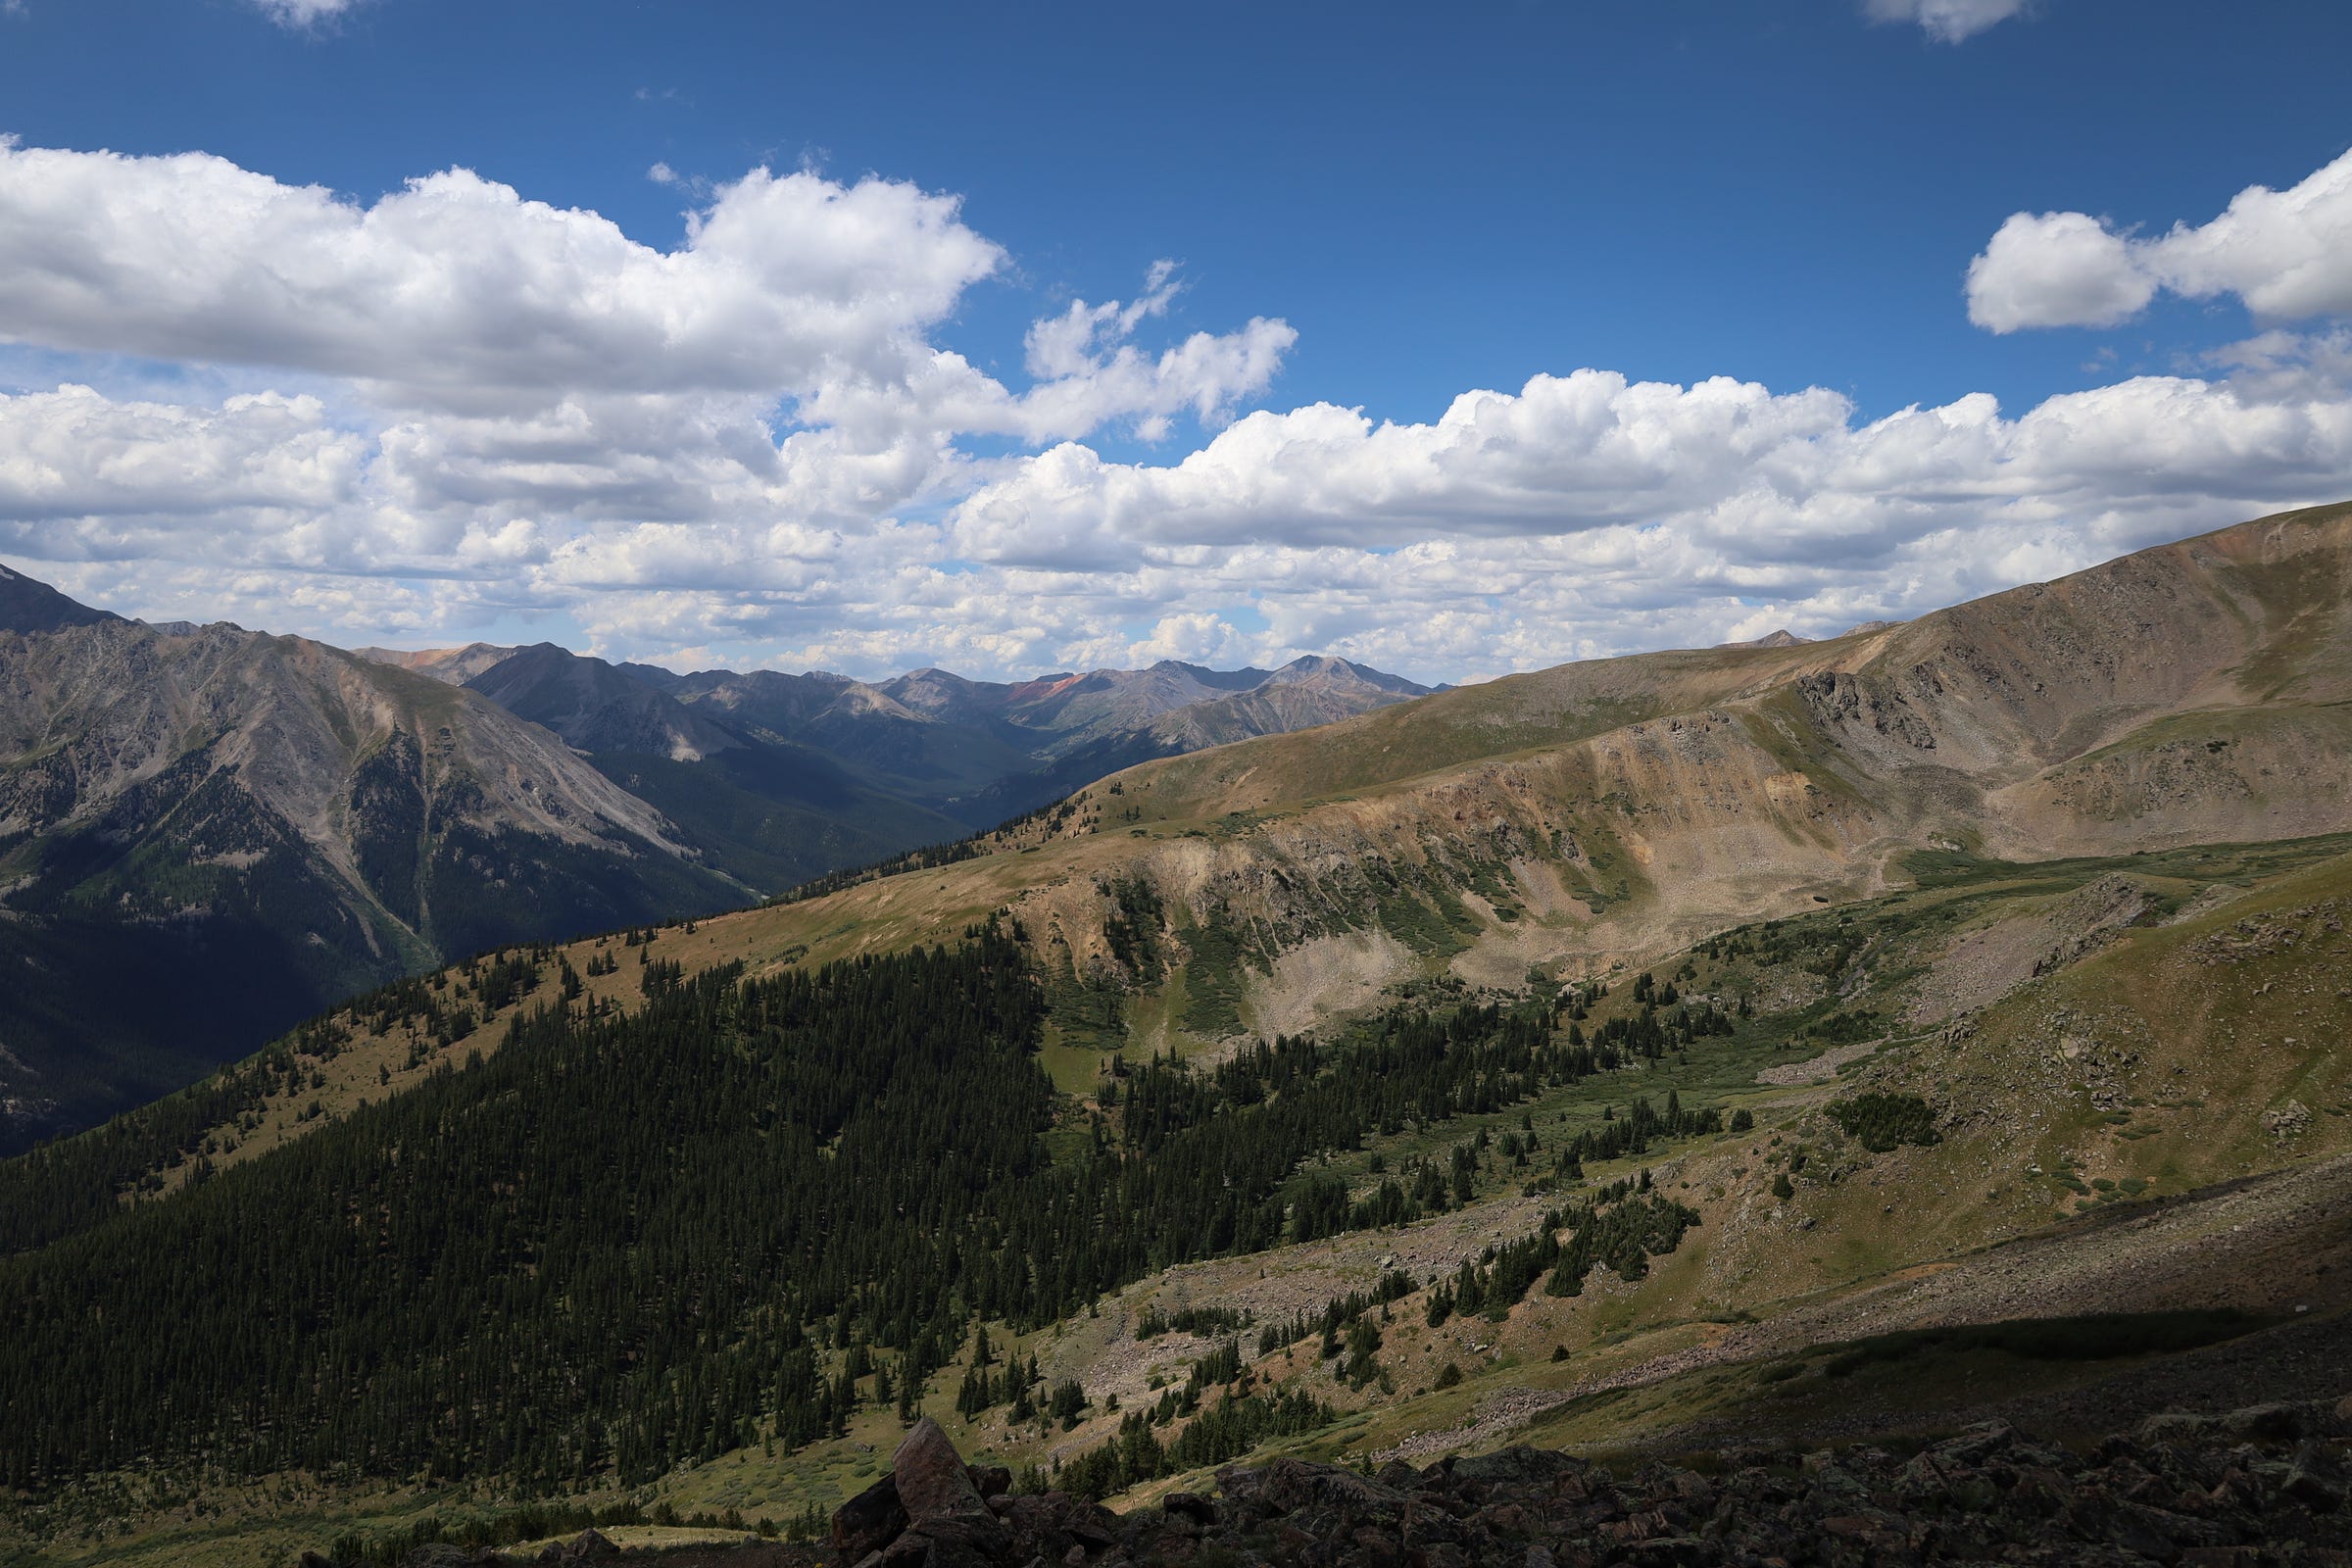 looking back down at the valley, due south of Mt. Elbert. The tree line is far below. puffy white clouds float overhead.